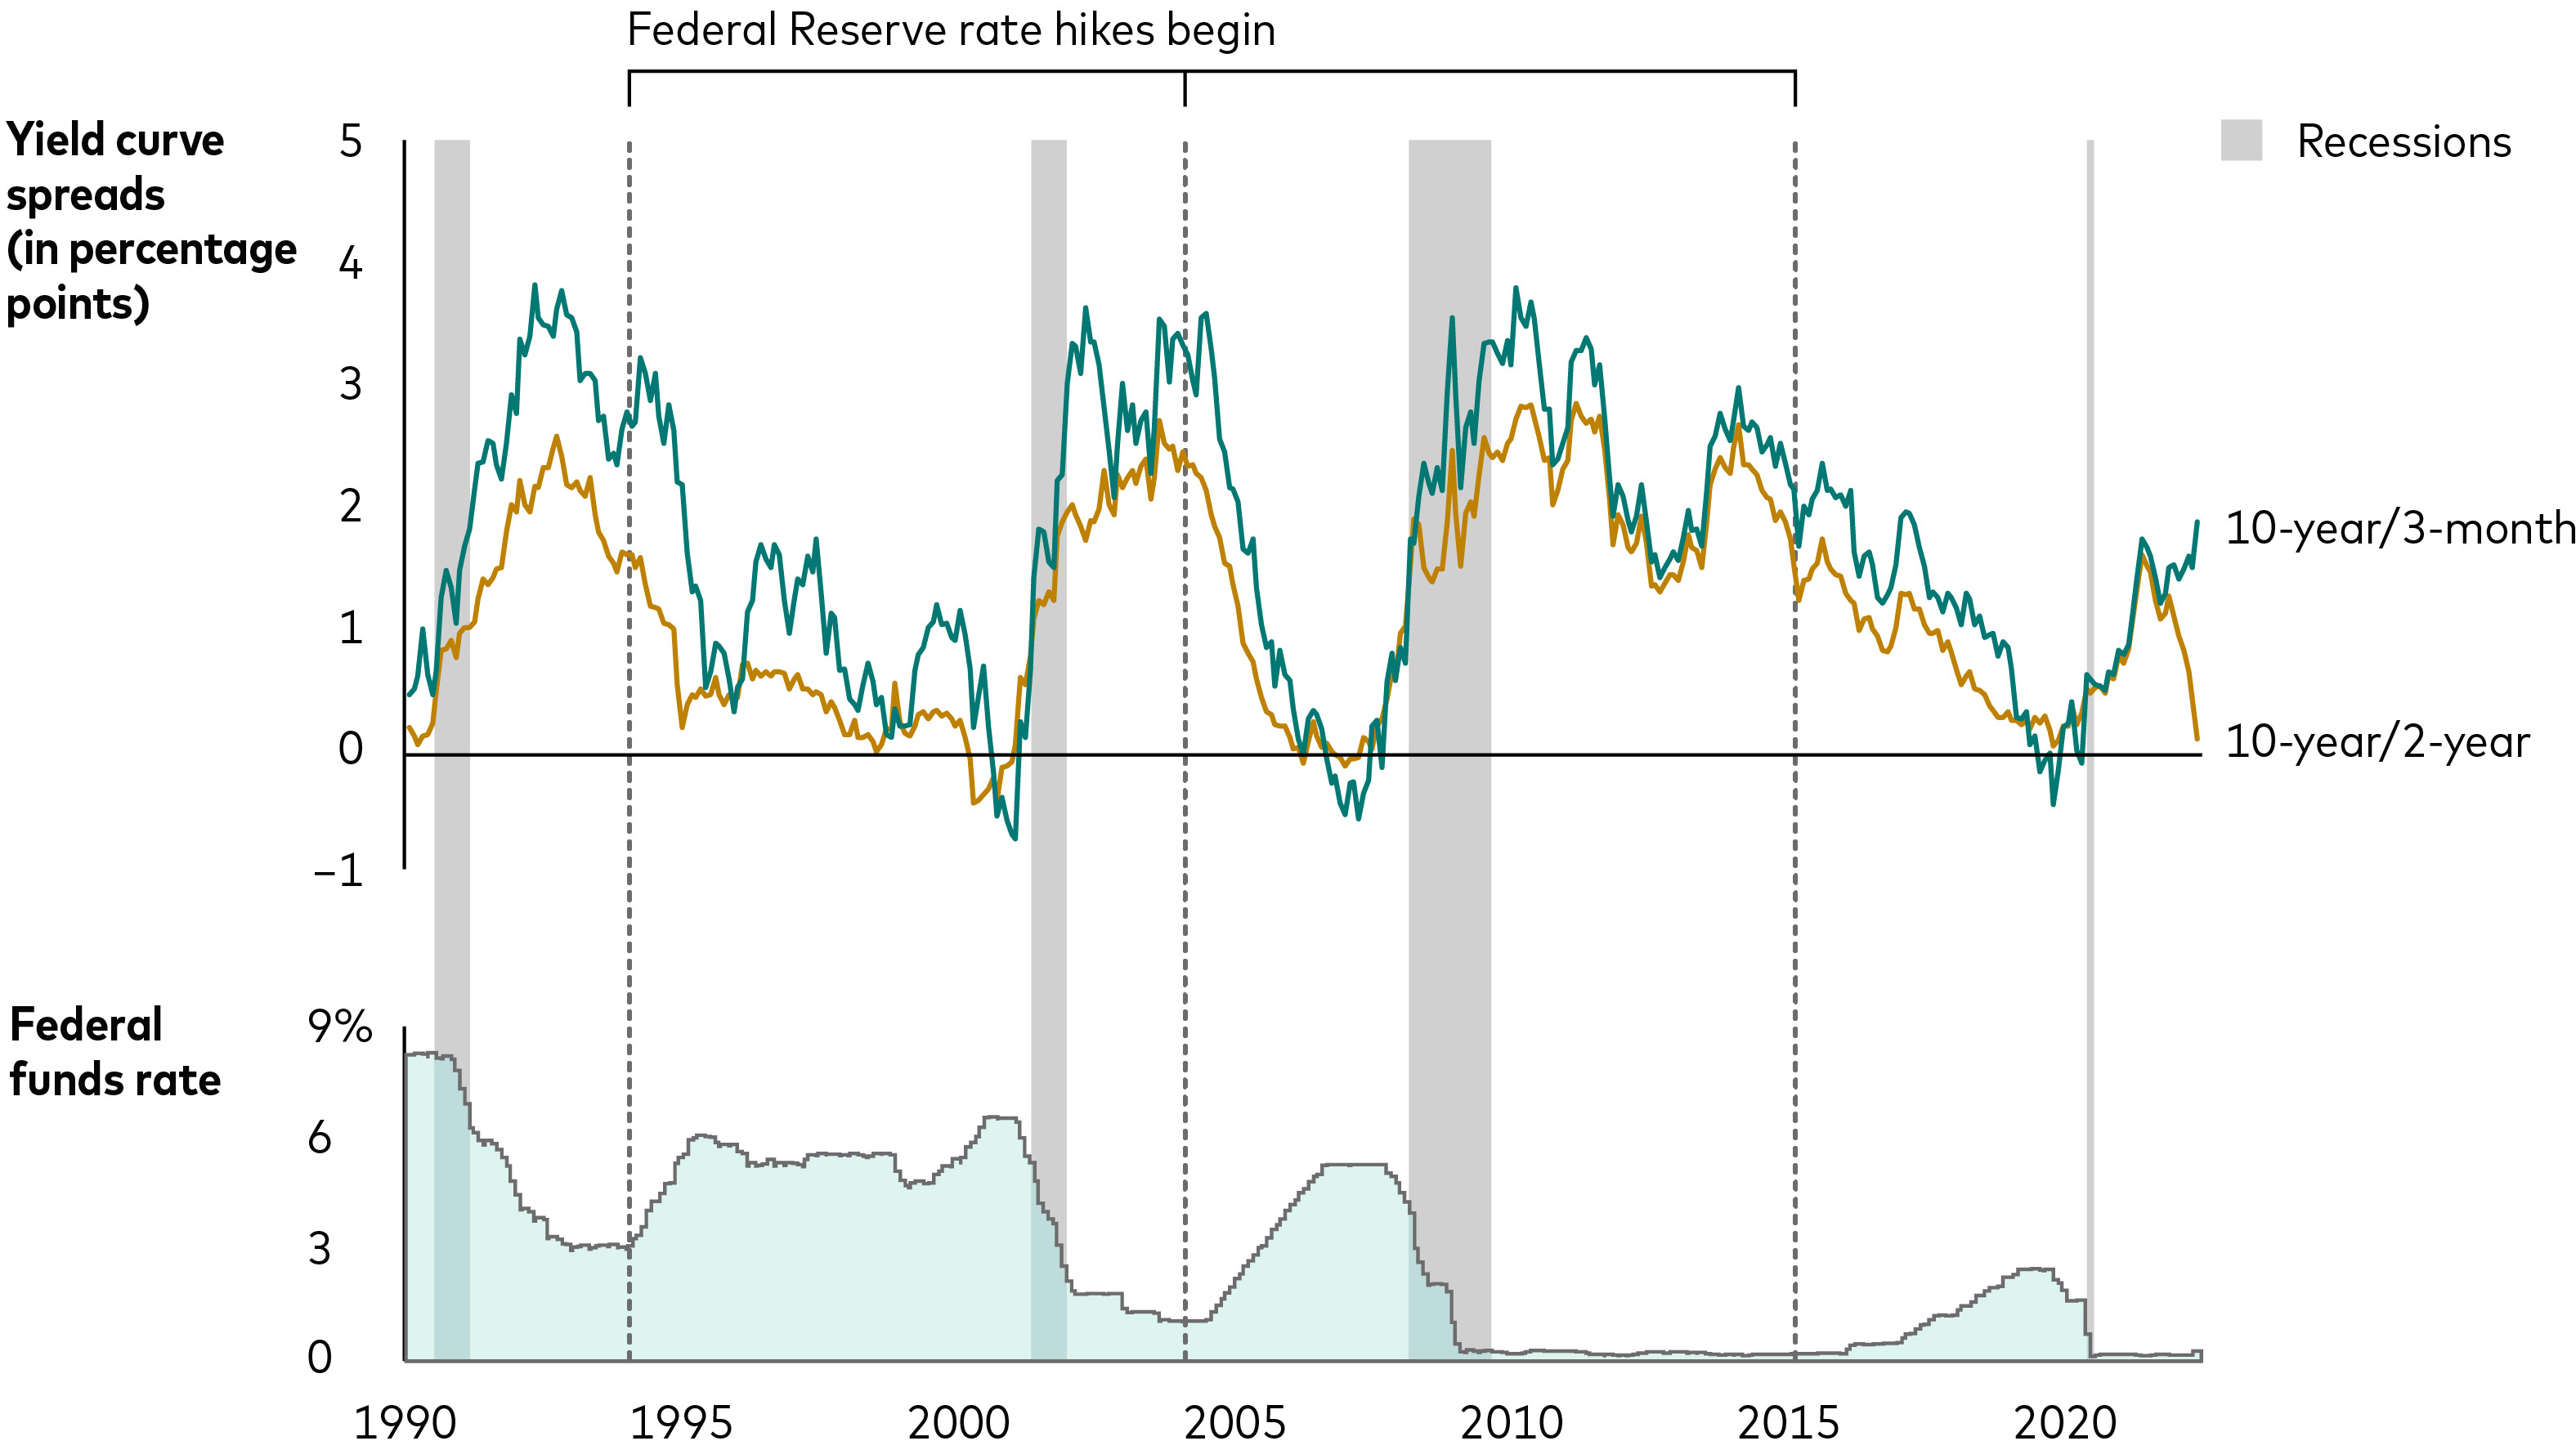 Yield curve chart showing Federal Funds Rate % vs. Yield Curve Spreads % (10-year/3-month and 10-year/2year) from 1990 to 2020 adding in Recessions and when Federal Reserve rate hikes begin